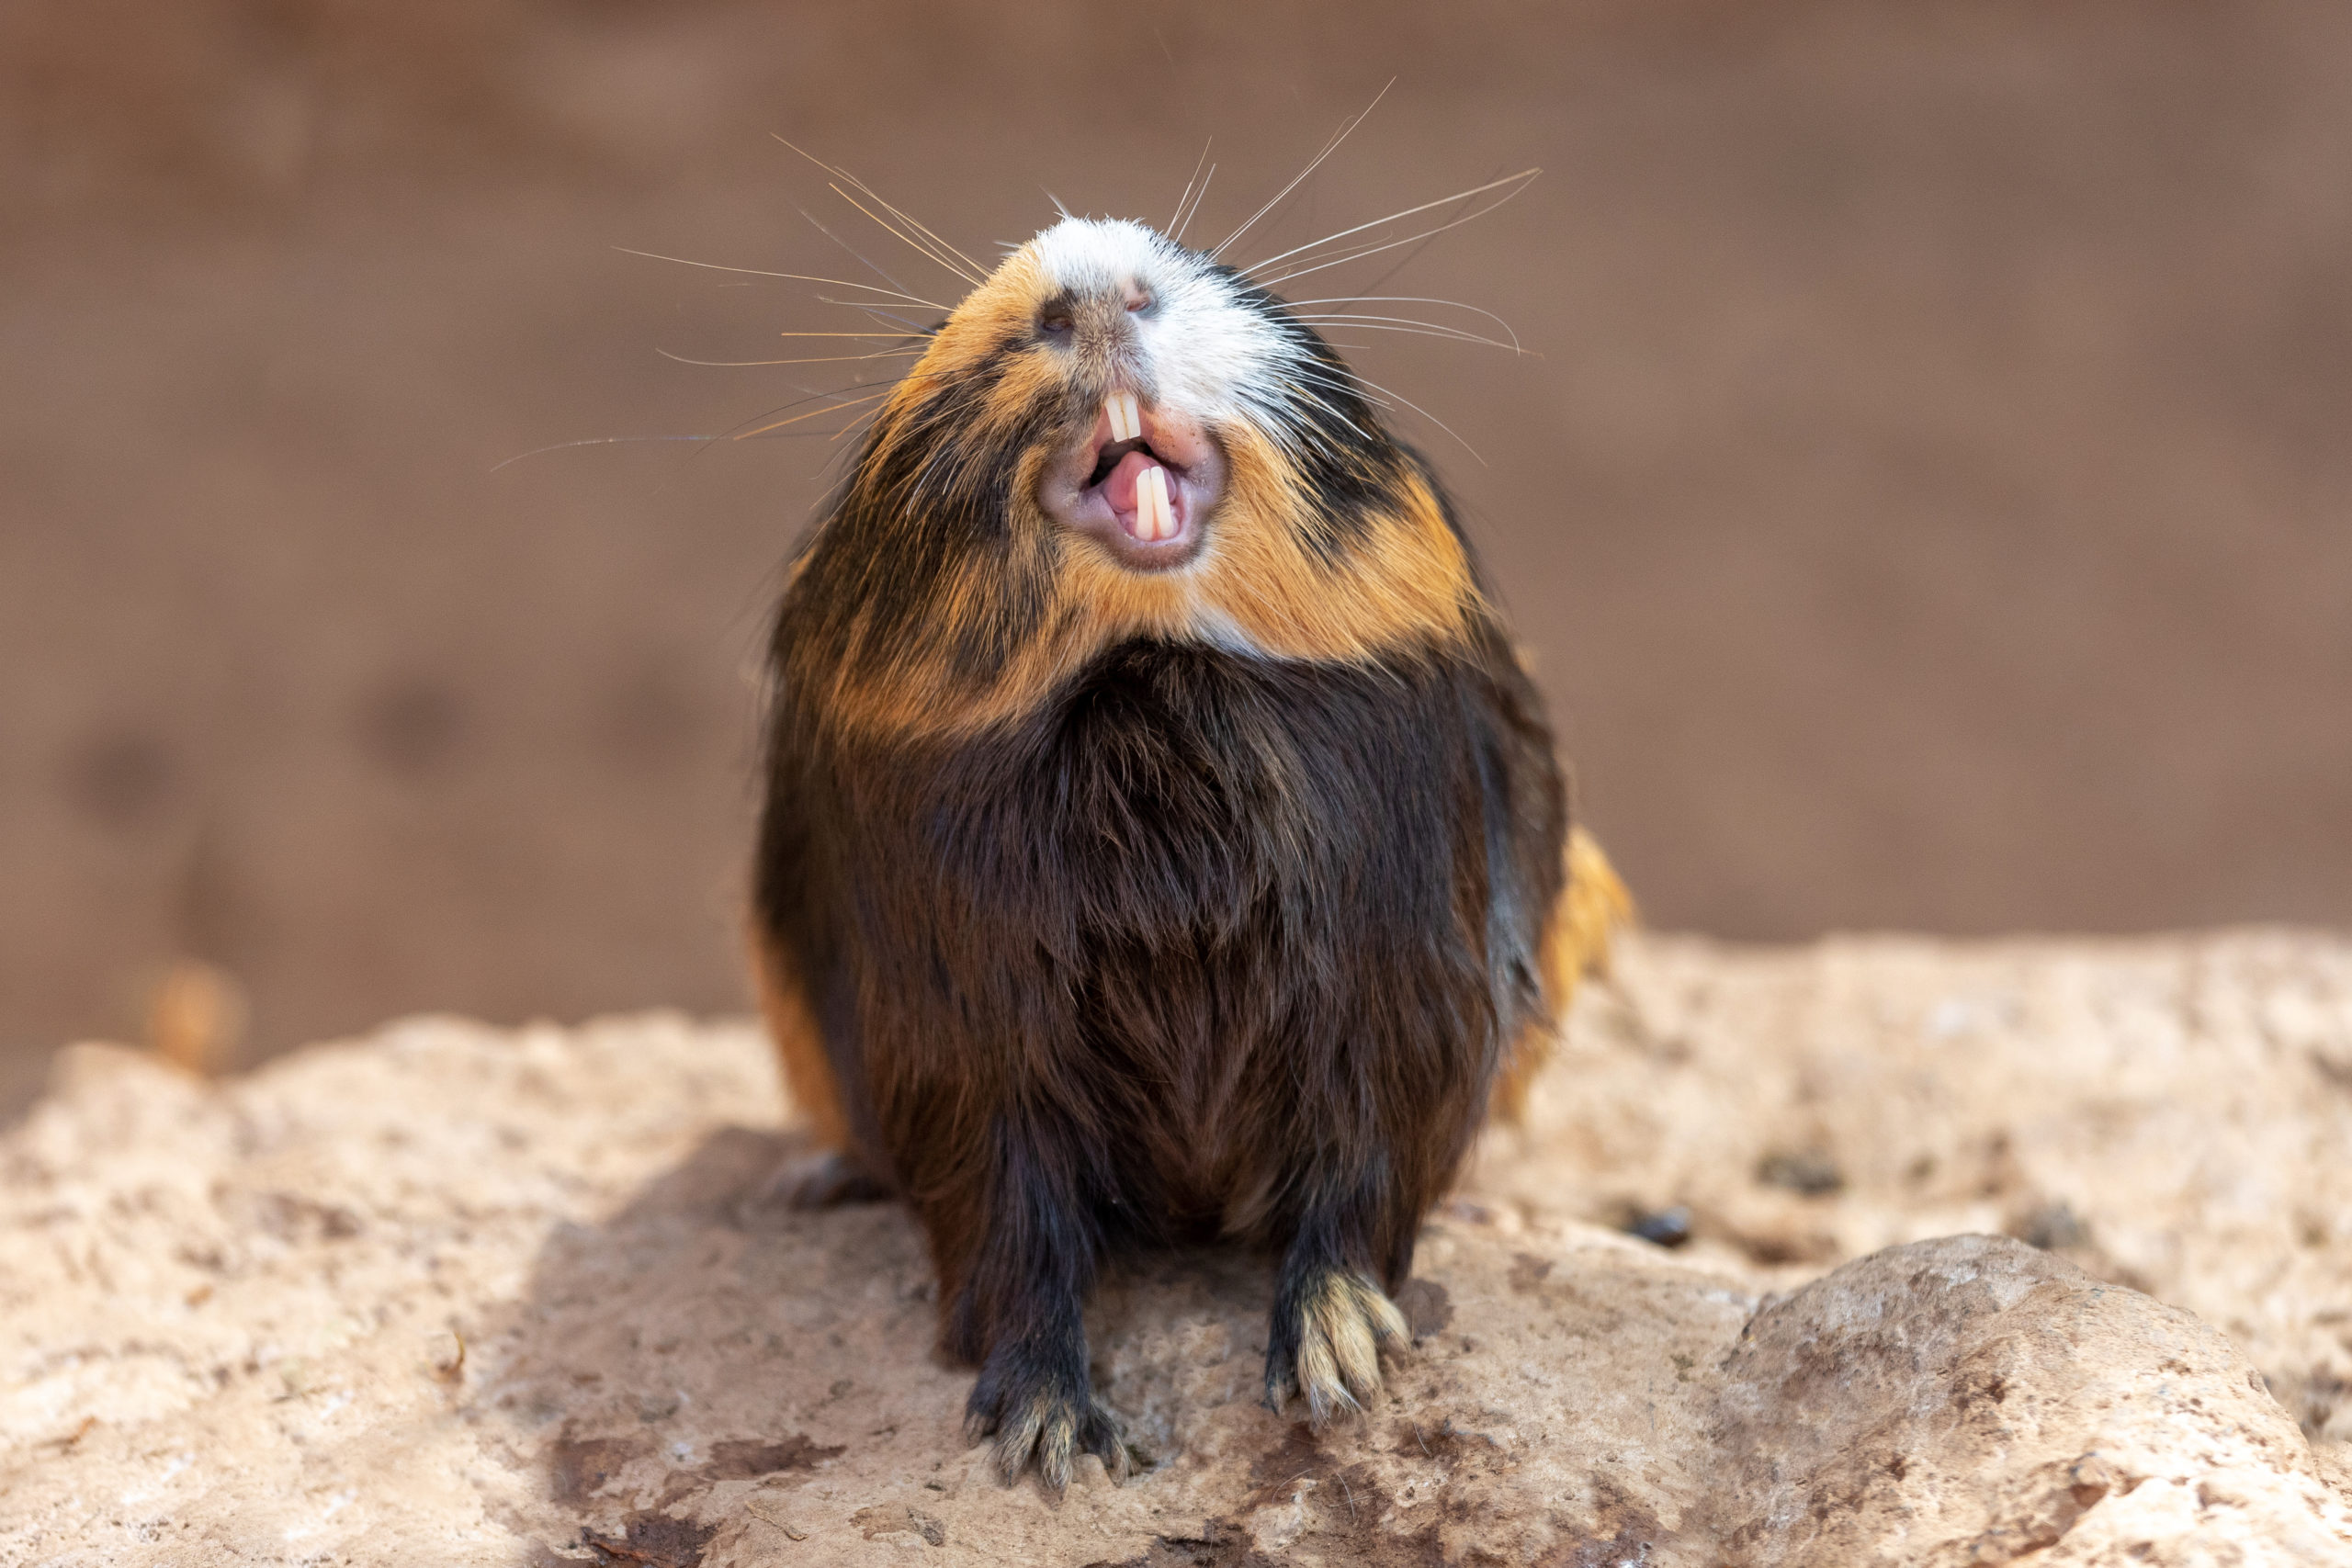 Guinea pig with open mouth